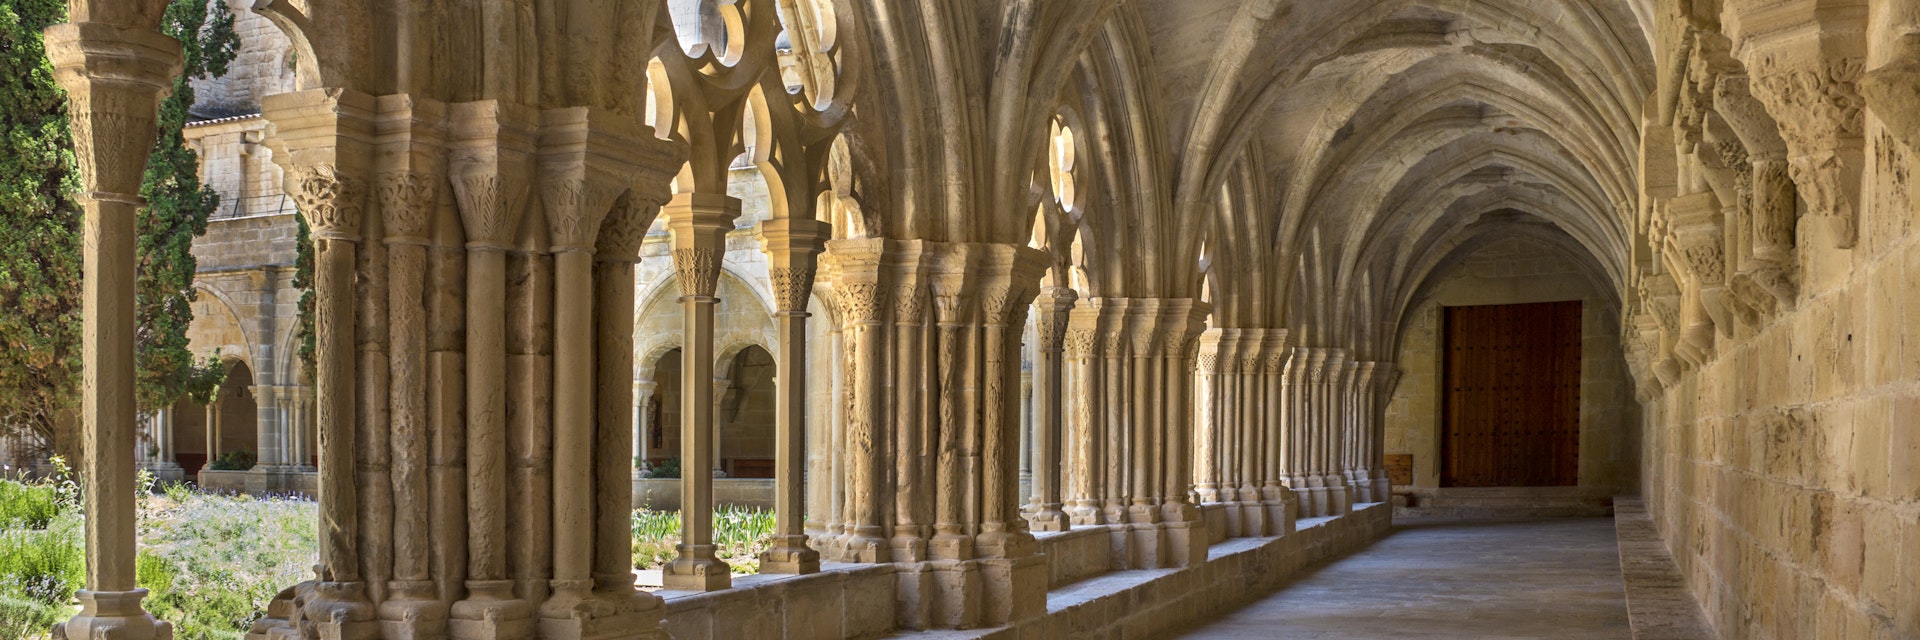 The cloisters at the Cistercian Monastery of Santa Maria de Poblet (Monestir de Poblet) in the Catalonia region of Spain. Parts of the monastery date from the 1150. The monks make their own wine and the monastery is surrounded by vineyards.